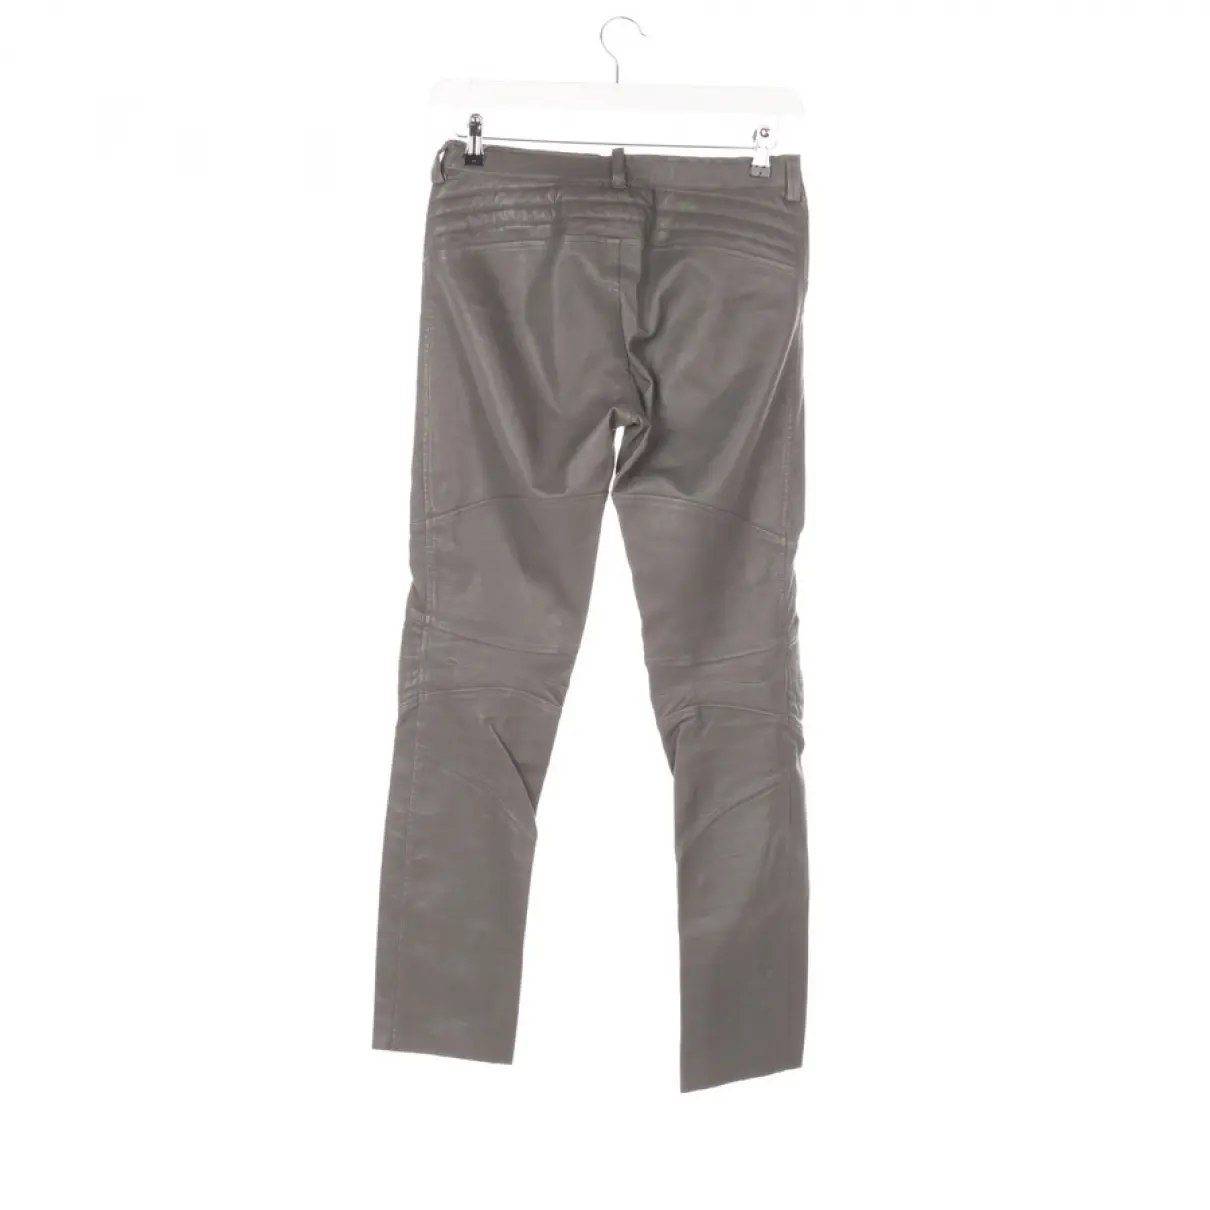 Buy Stouls Leather trousers online